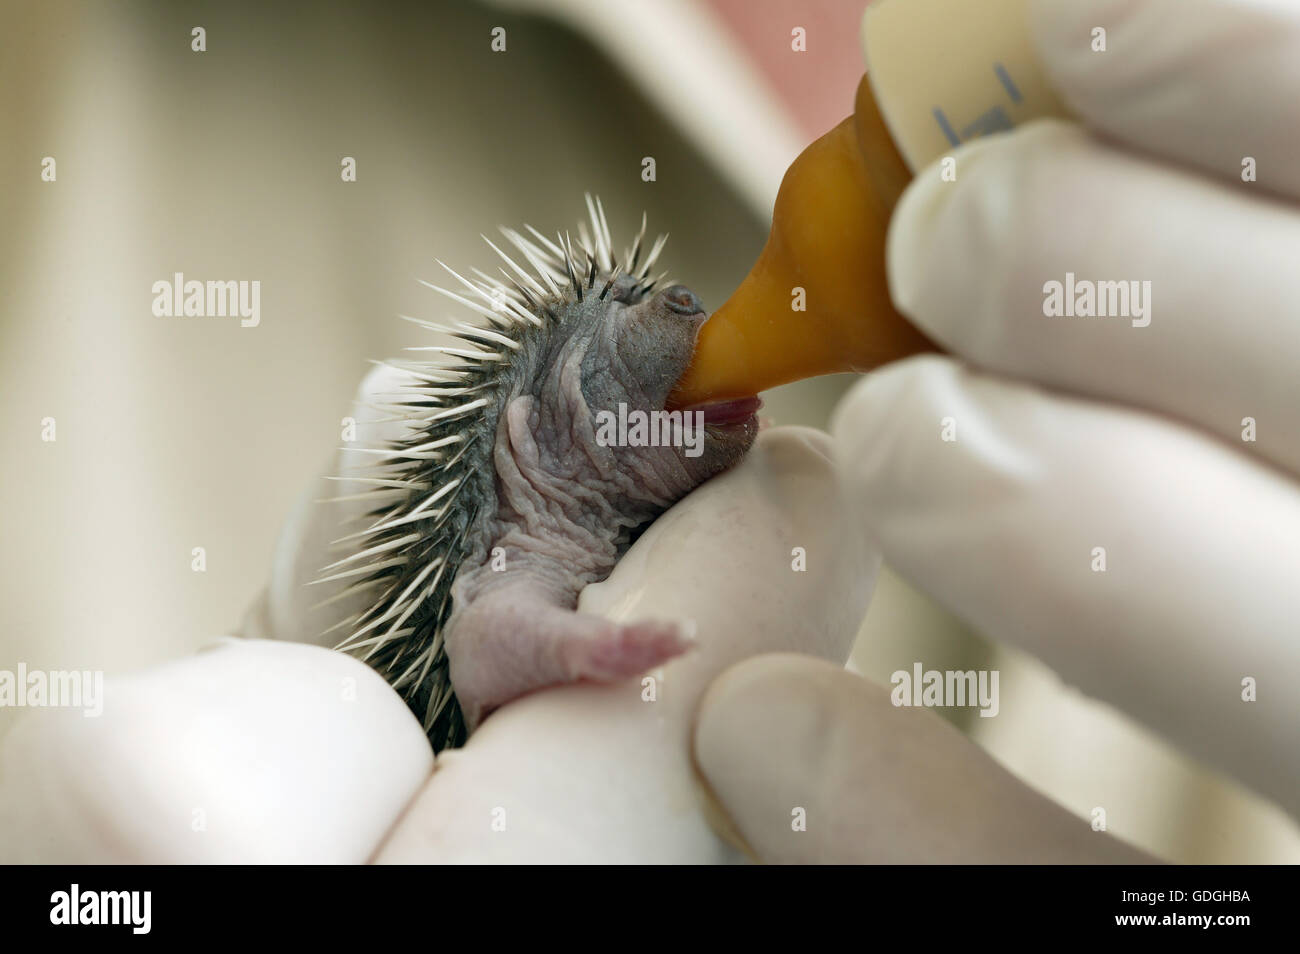 BABY HEDGEHOG RESCUED AT LA DAME BLANCHE, AN ANIMAL PROTECTION CENTER IN NORMANDY, FRANCE Stock Photo